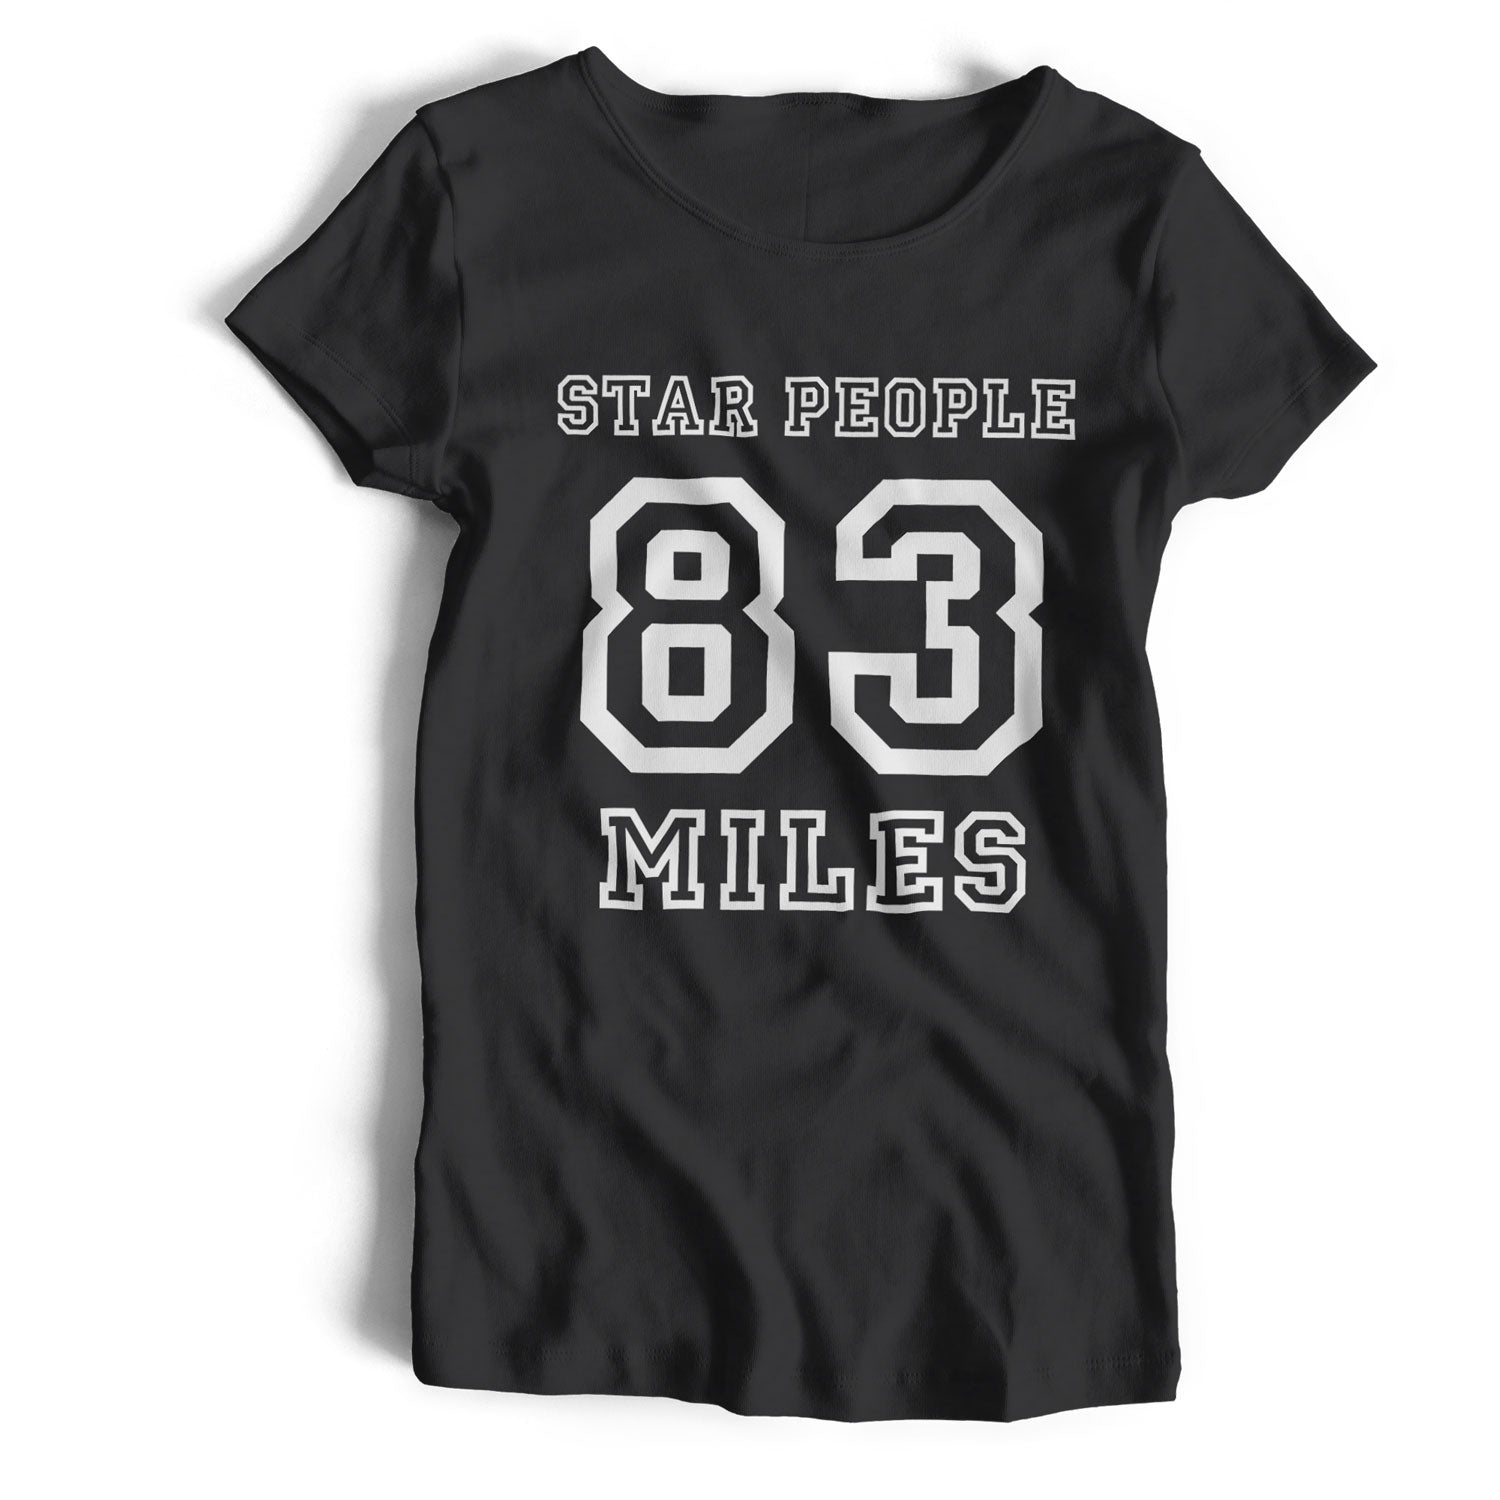 Miles Star People 83 T Shirt Classic Jazz Inspired Design